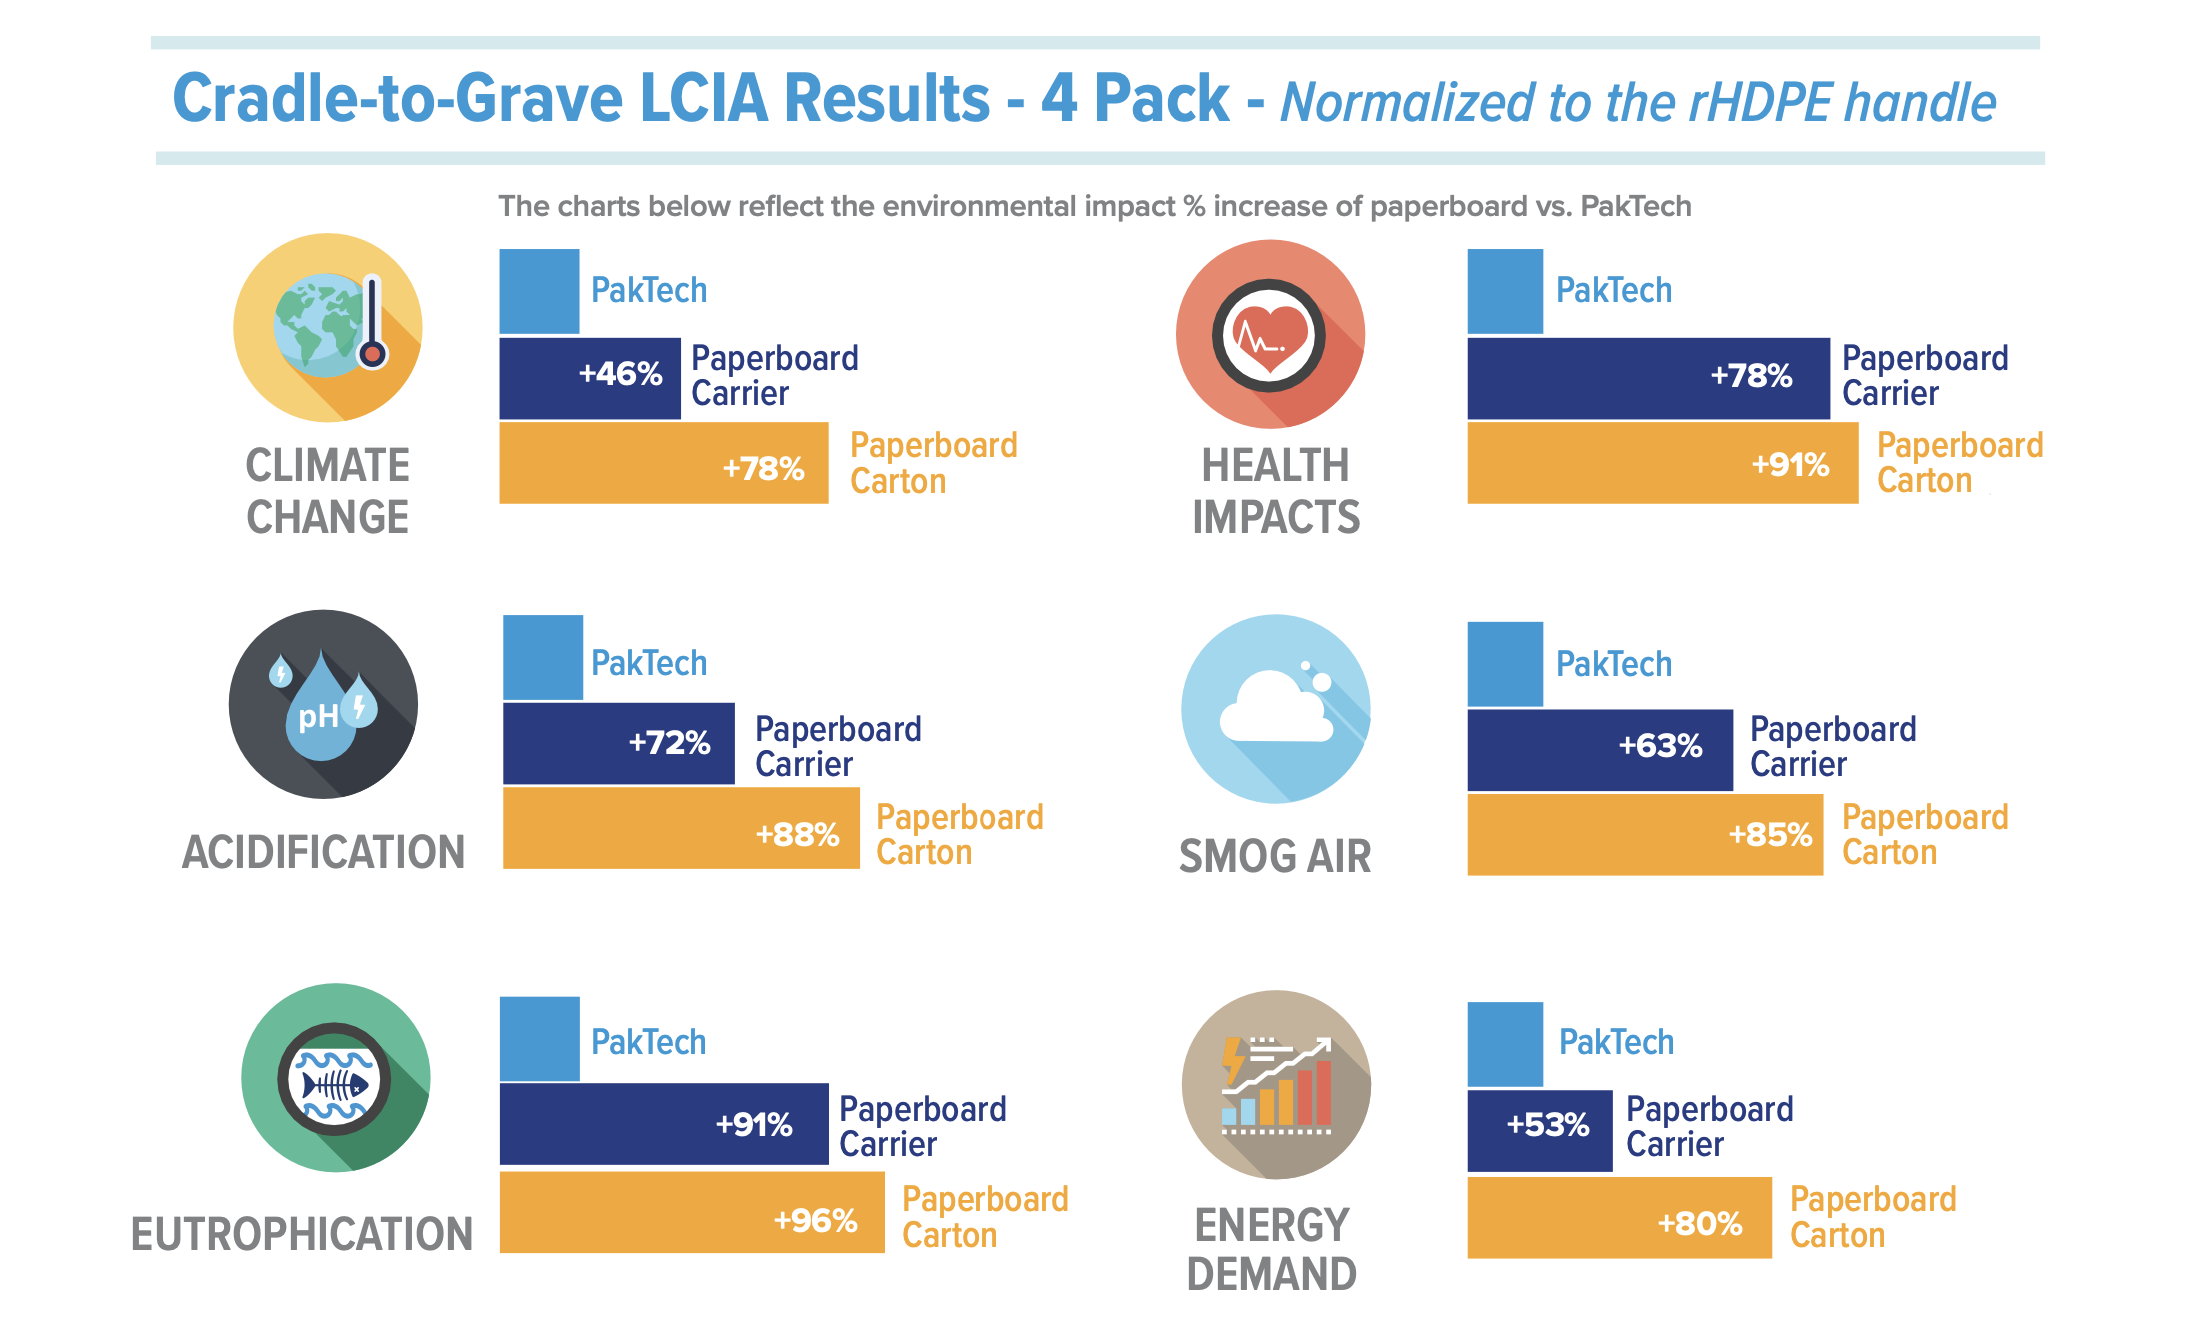 A chart of Cradle-to-Grave LCIA Results